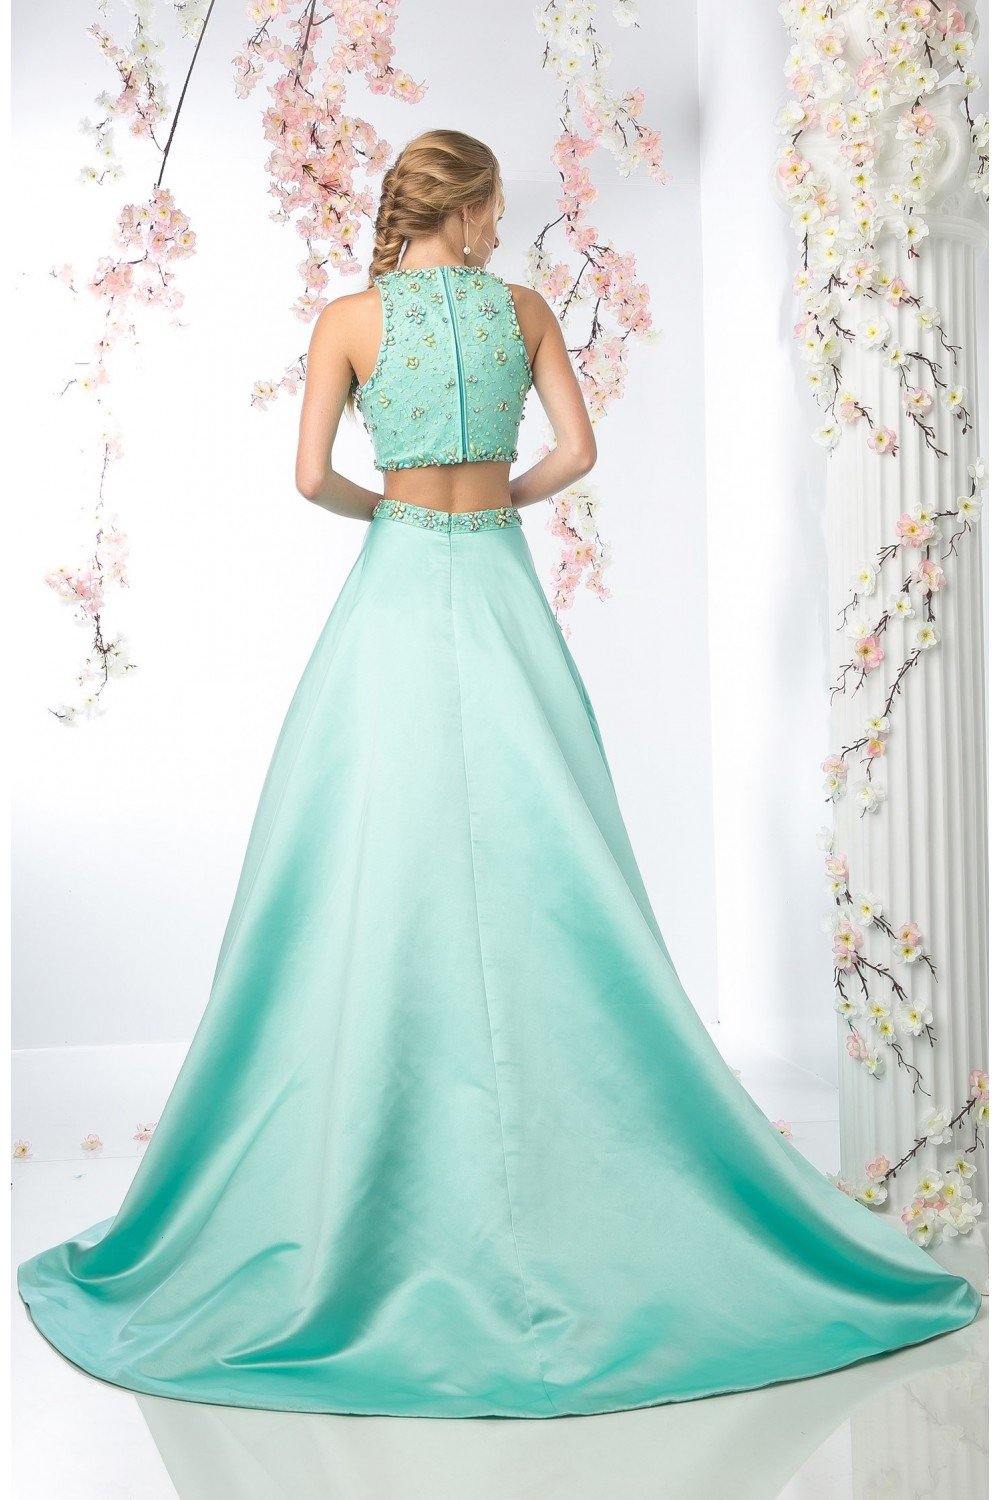 Two Piece Sexy Prom Dress - The Dress Outlet